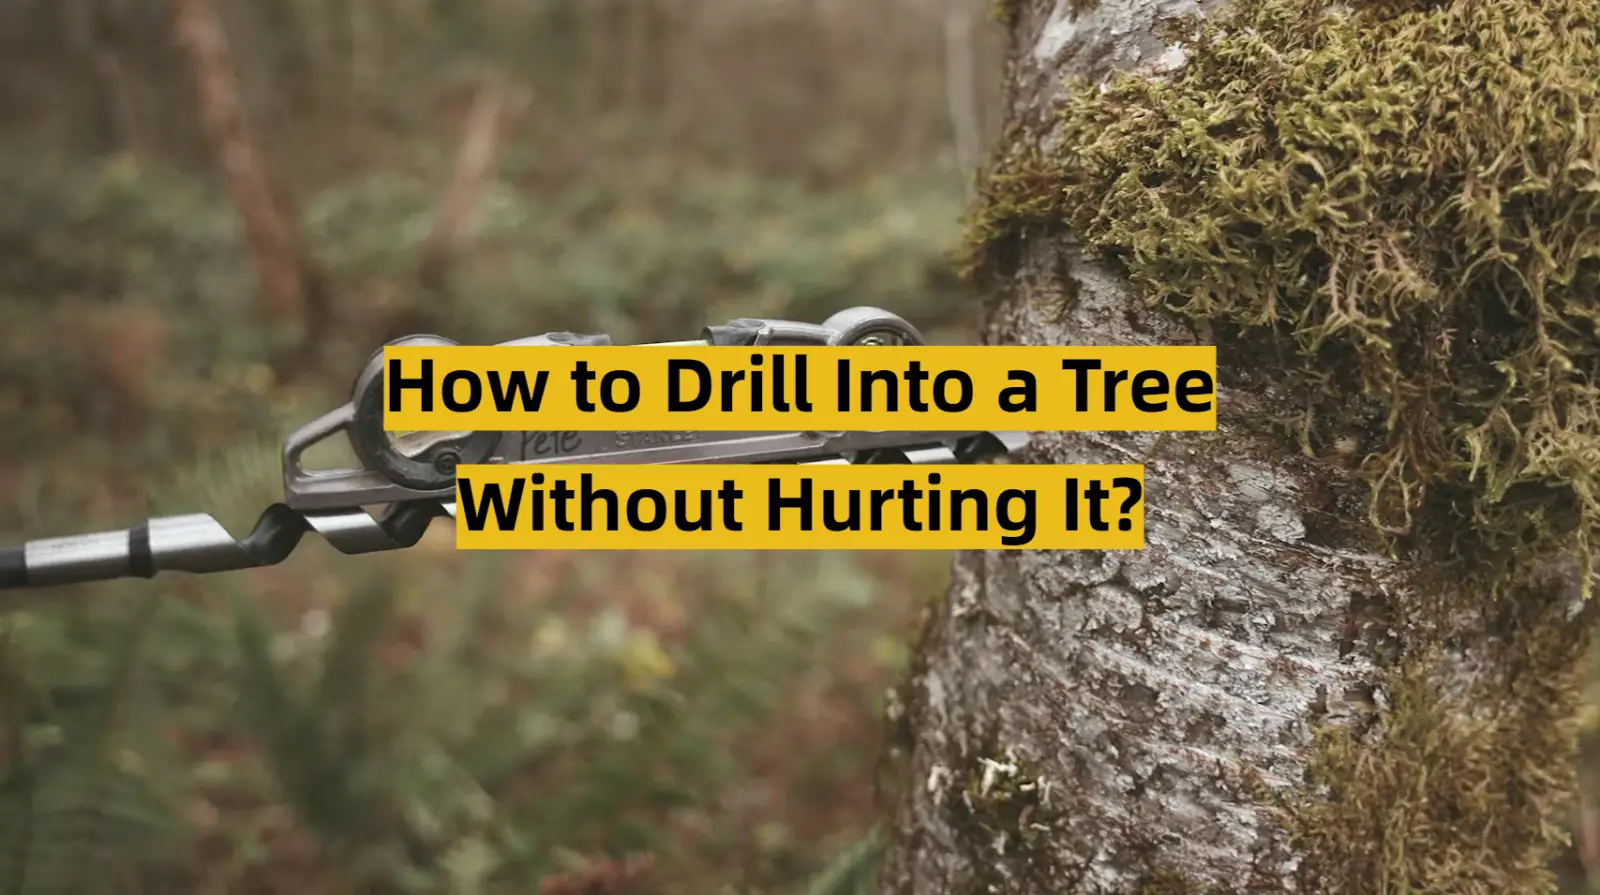 How to Drill Into a Tree Without Hurting It?